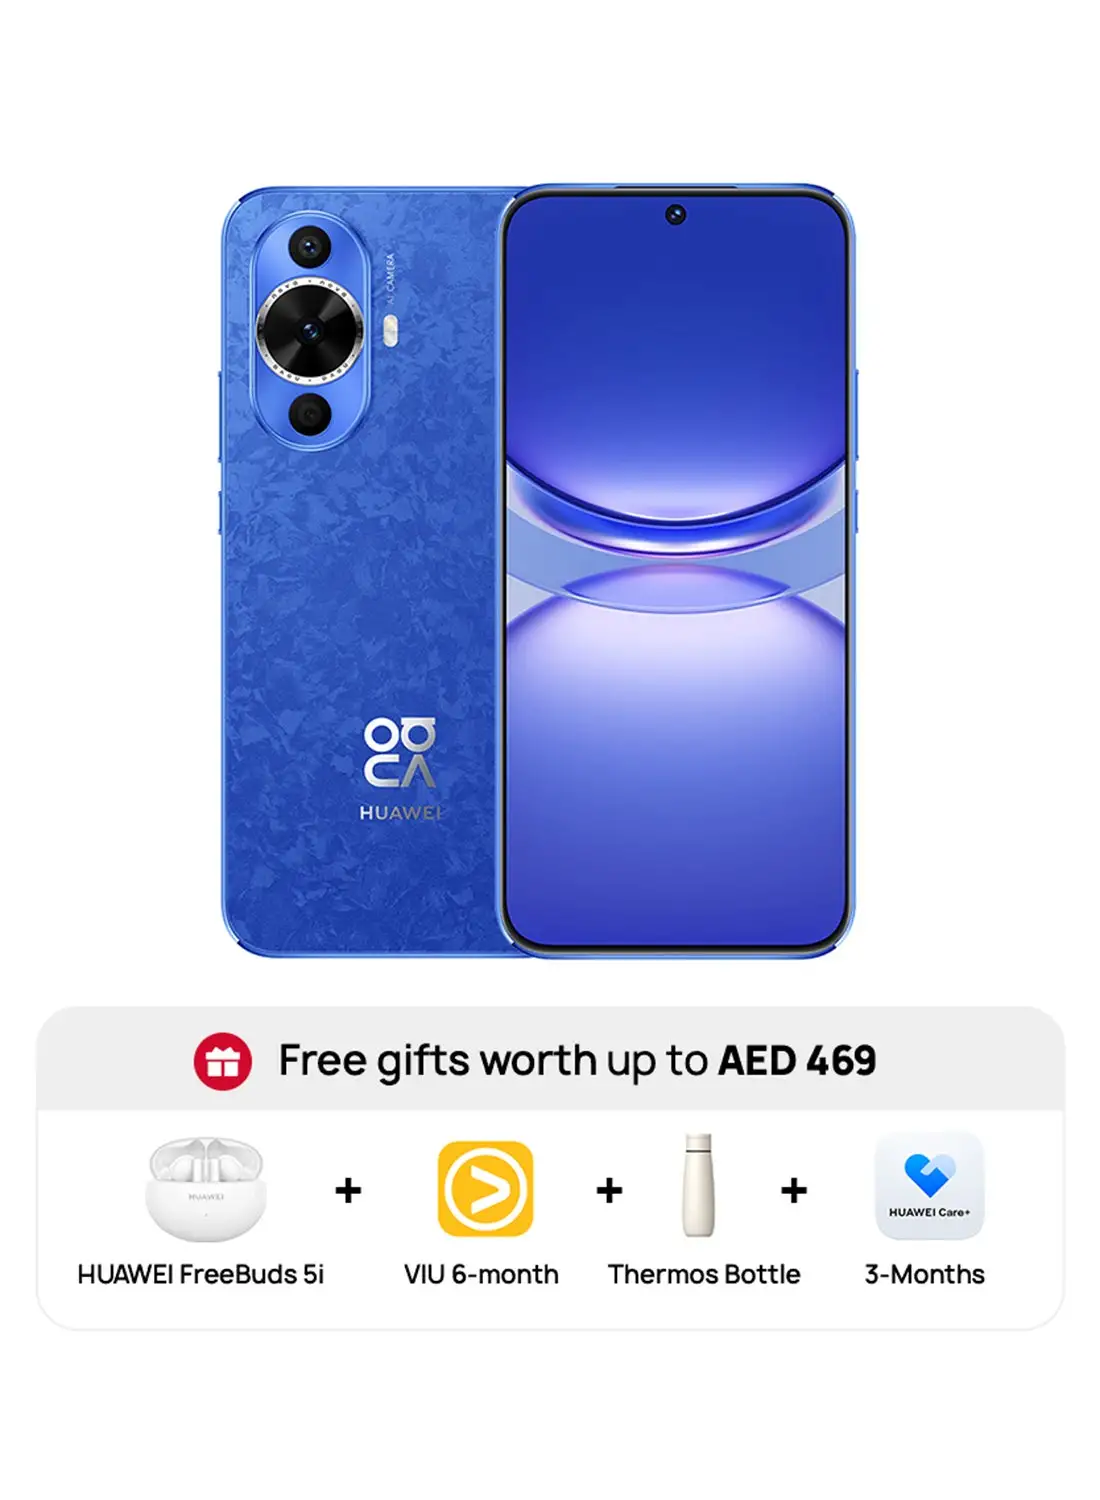 HUAWEI Nova 12S Dual SIM Blue 8GB RAM 256GB 4G LTE With FB5i + 6 Months VIU + Thermos Bottle  + 3 Months Huawei Care+ Worth AED 469 - Middle East Version